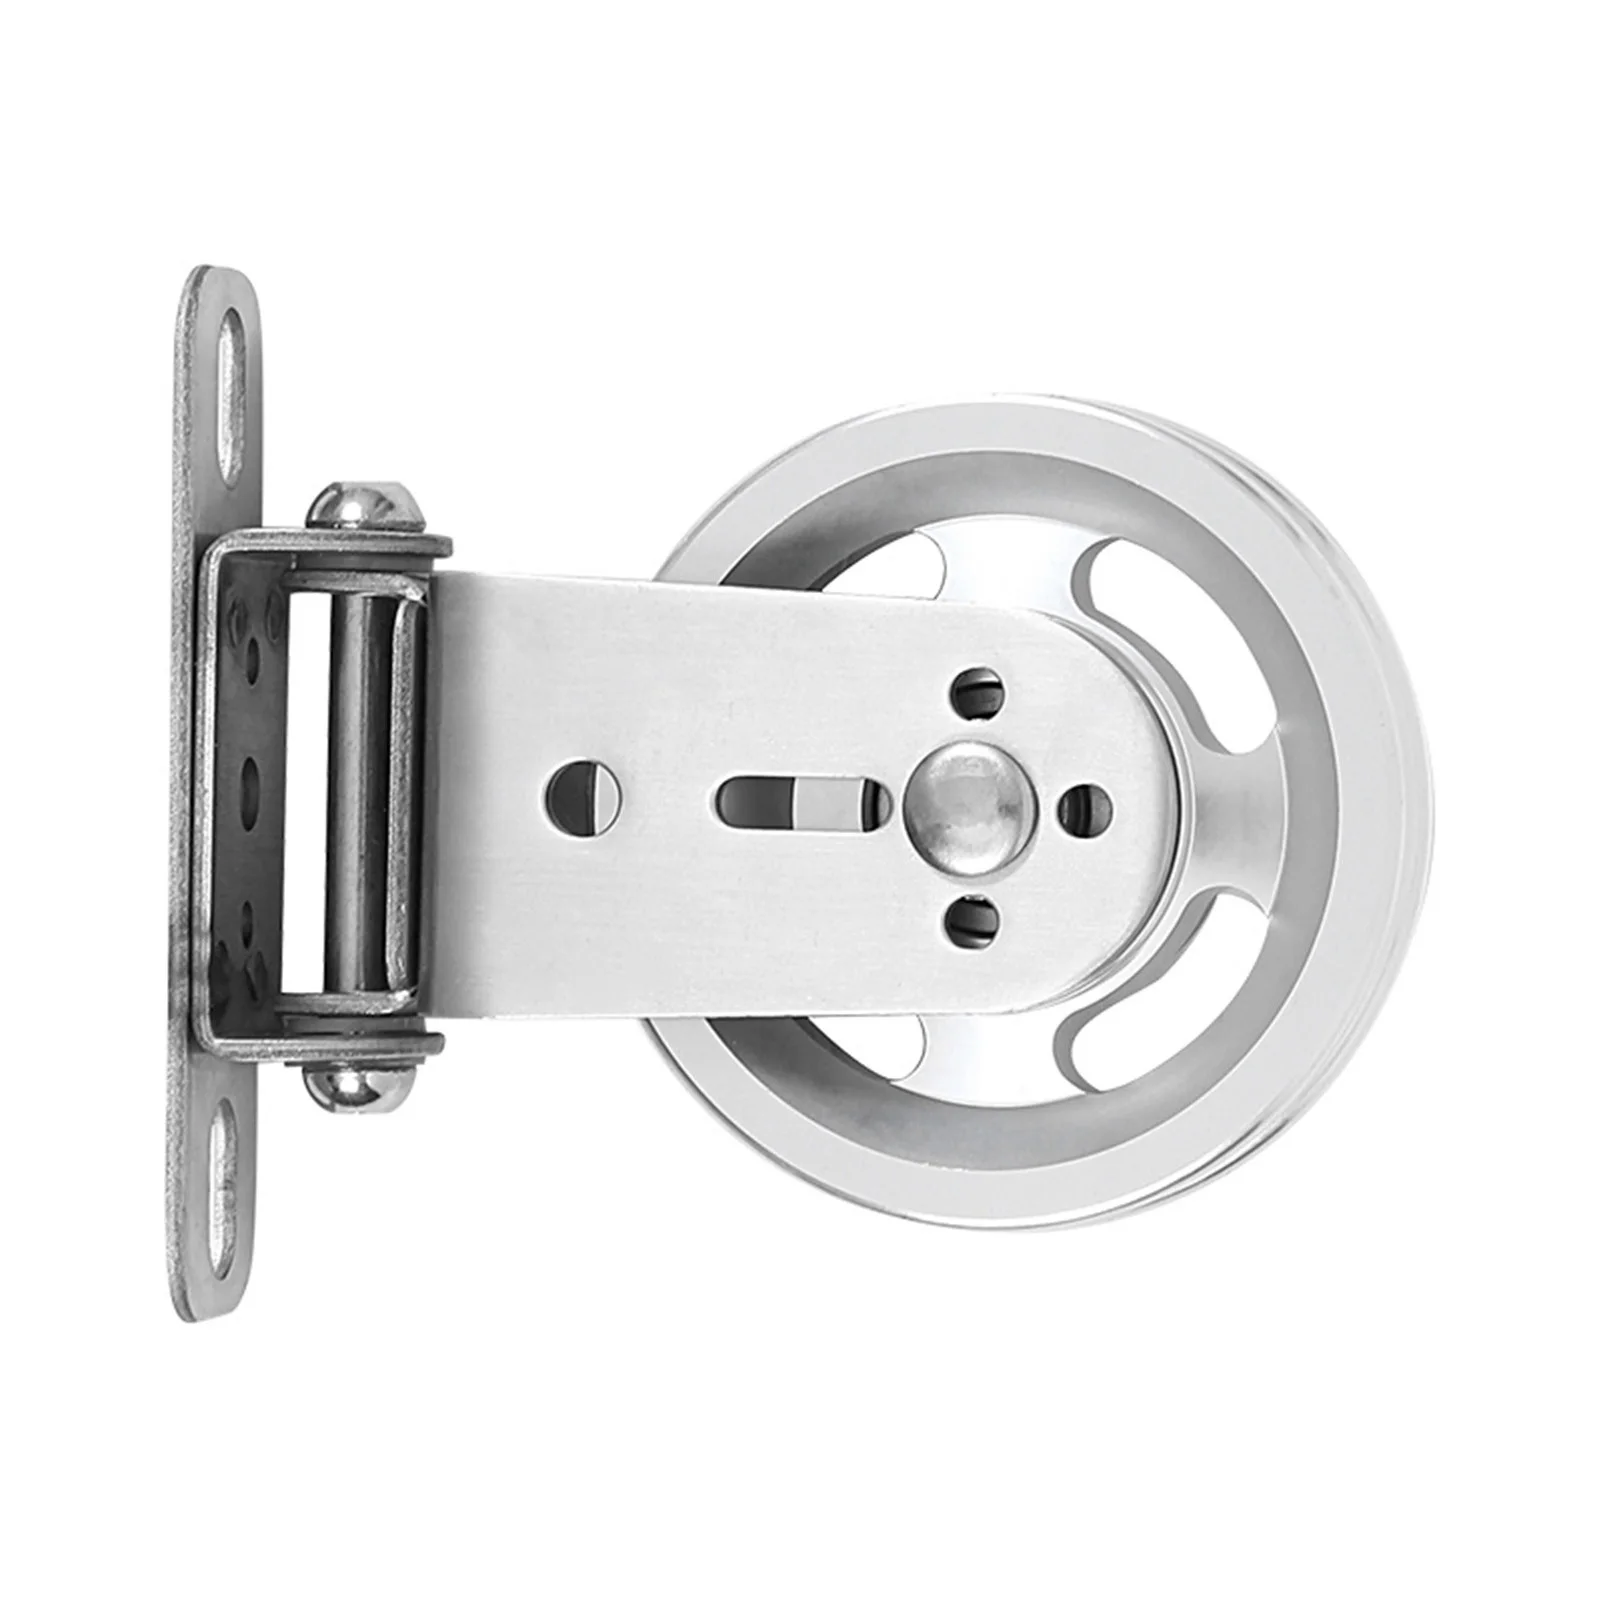 Wall-mounted Gym Home Rotating Silent Pulley DIY Lift Cable System Attachments Stainless Steel Mute Swivel Bearing Wheel